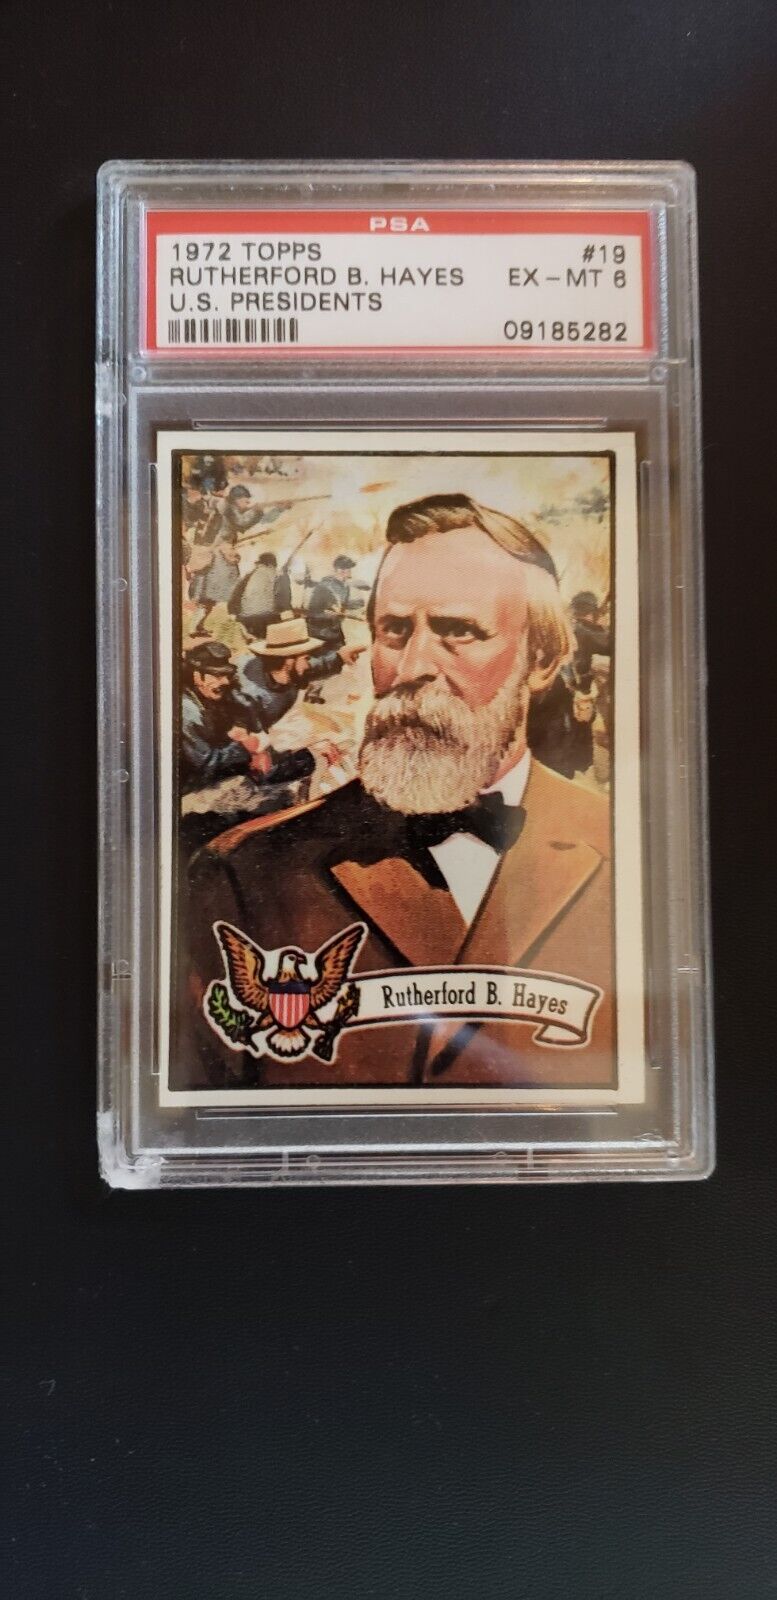 1972 Topps US Presidents Rutherford B Hayes Graded PSA 6